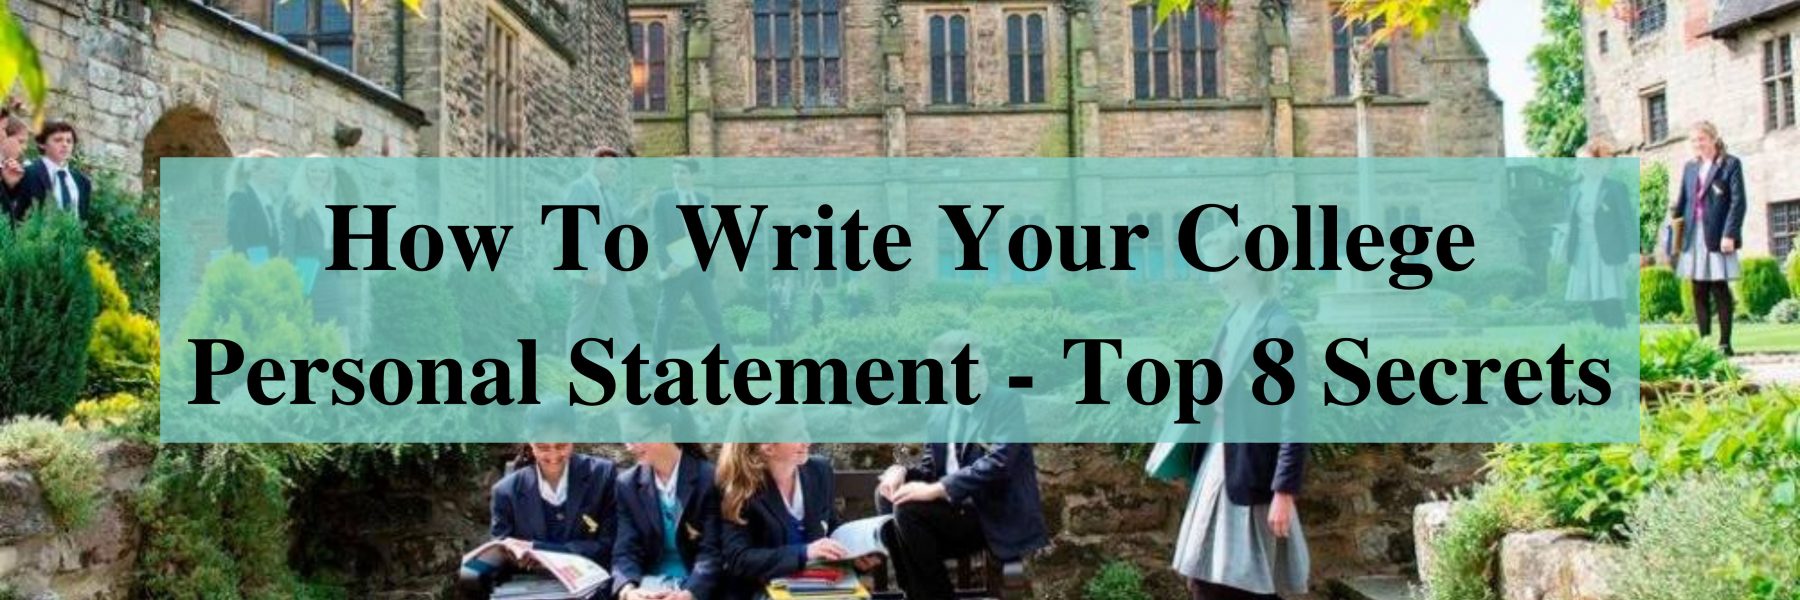 Top 8 secret tips to write college personal statement